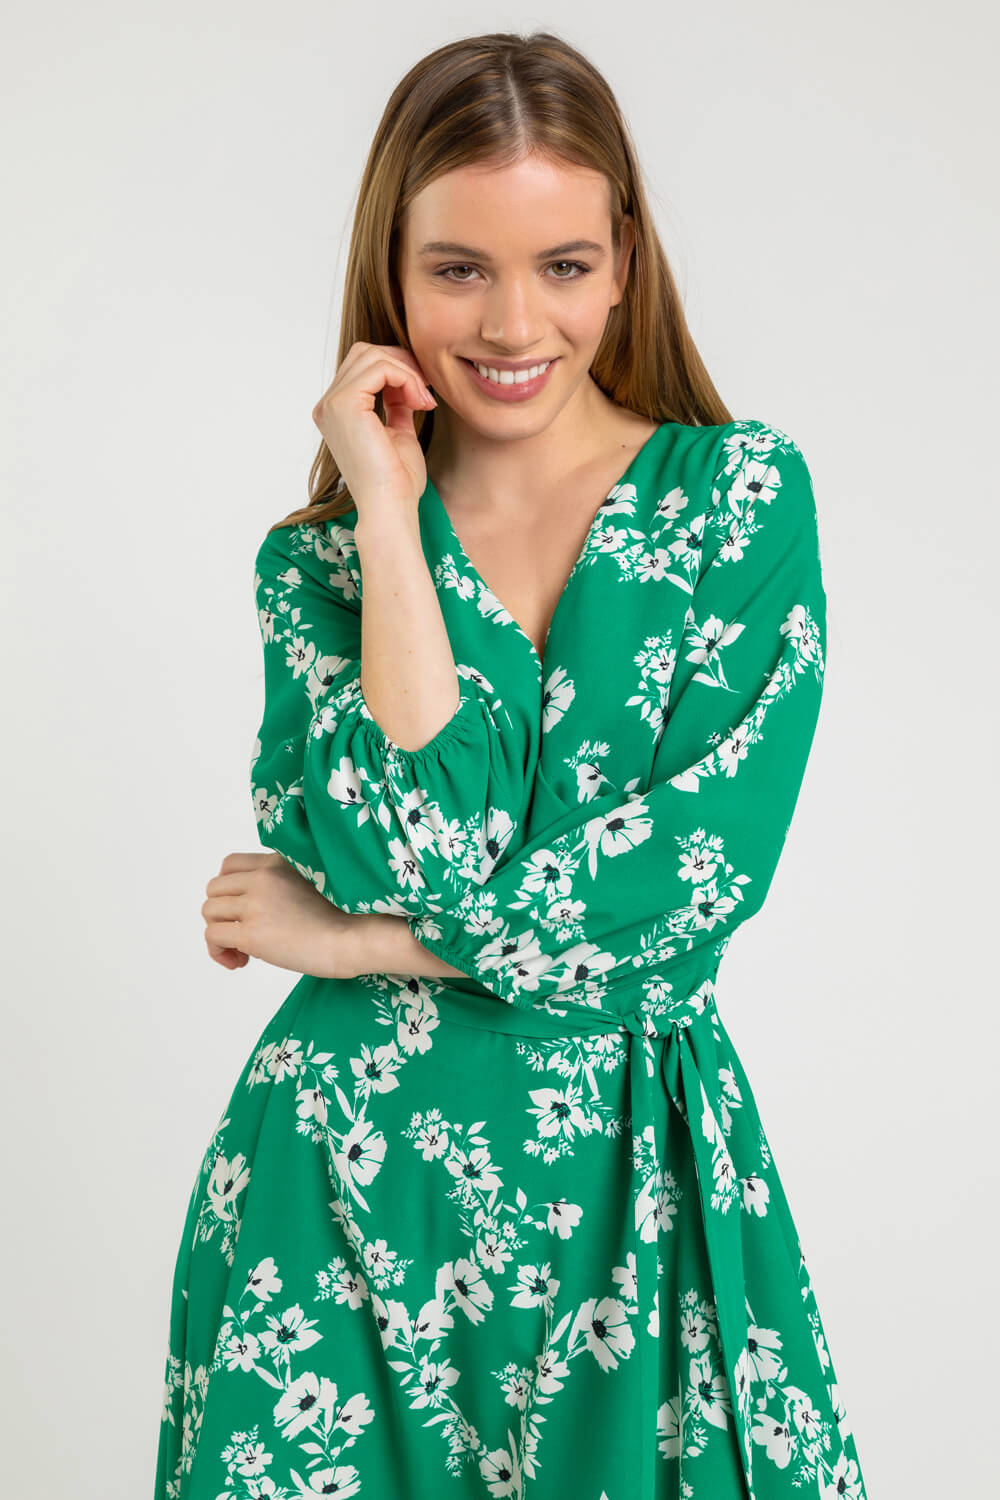 Green Petite Floral Fit & Flare Dress, Image 4 of 4